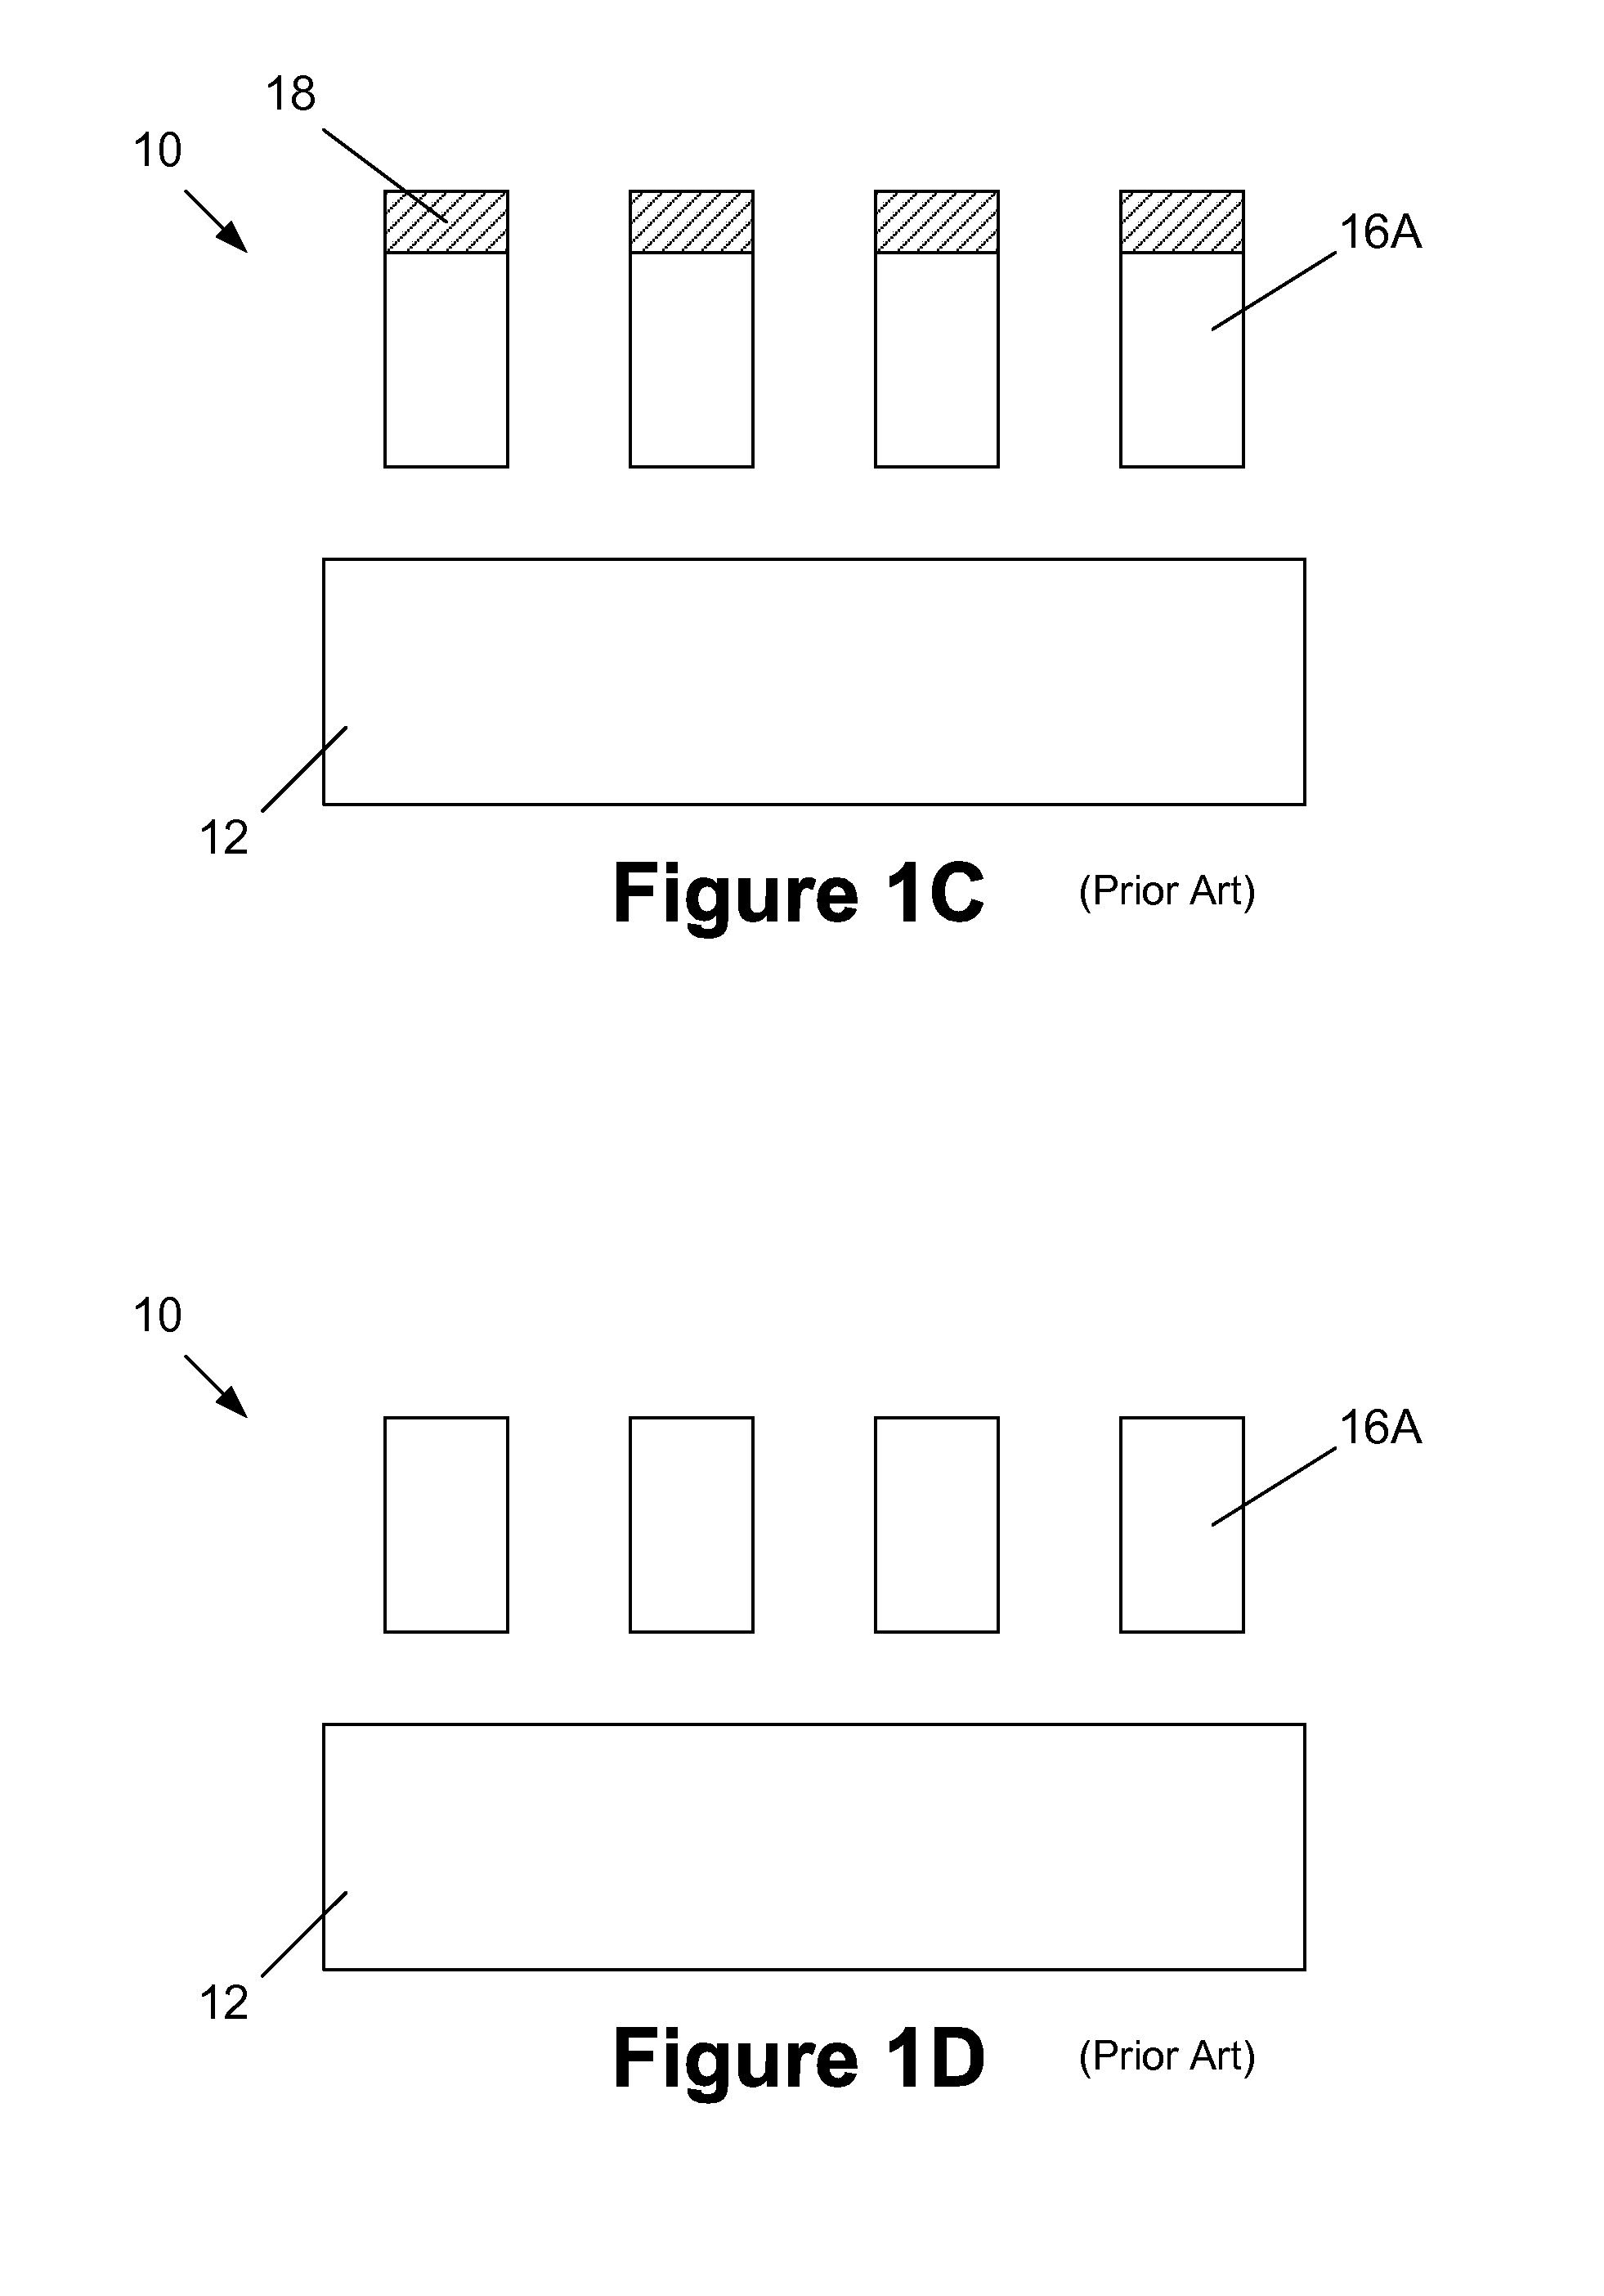 Methods of forming dielectrically isolated fins for a FinFET semiconductor by performing an etching process wherein the etch rate is modified via inclusion of a dopant material